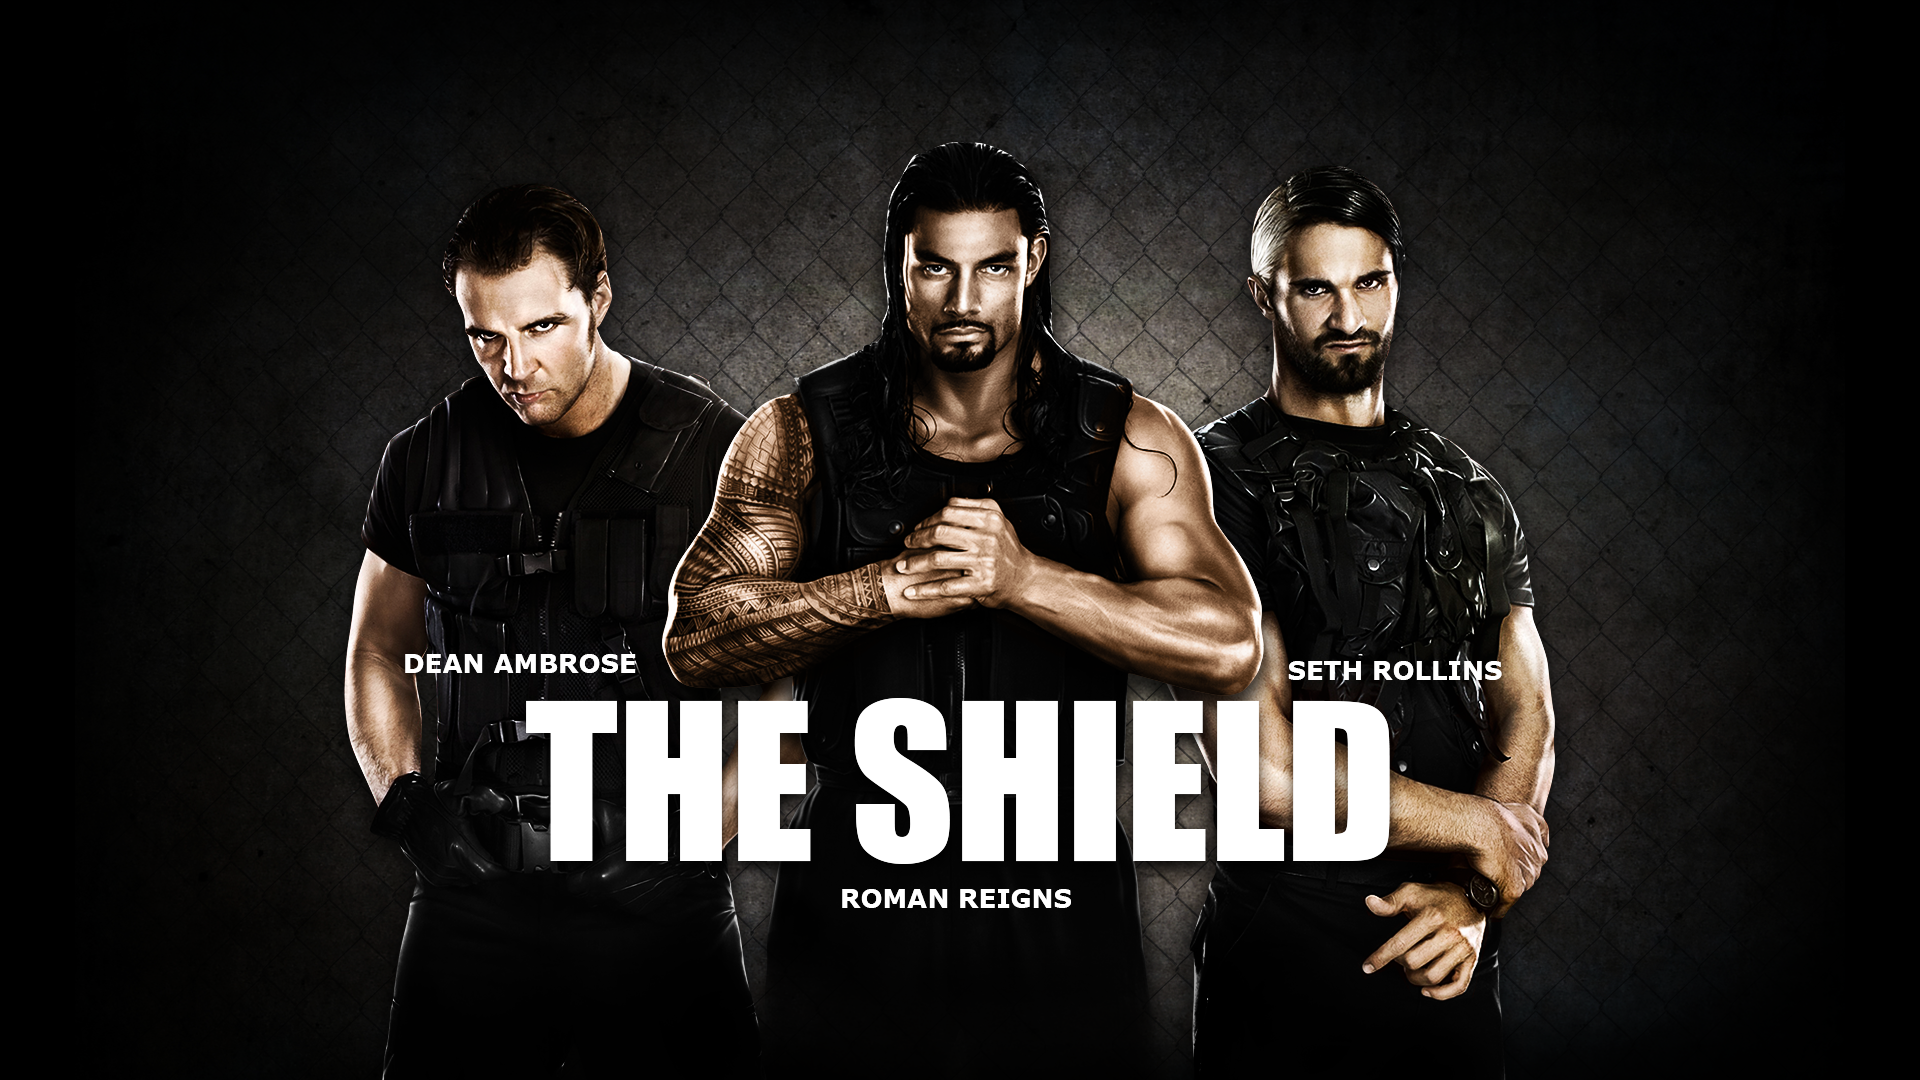 The Shield Wallpaper by Mequ on